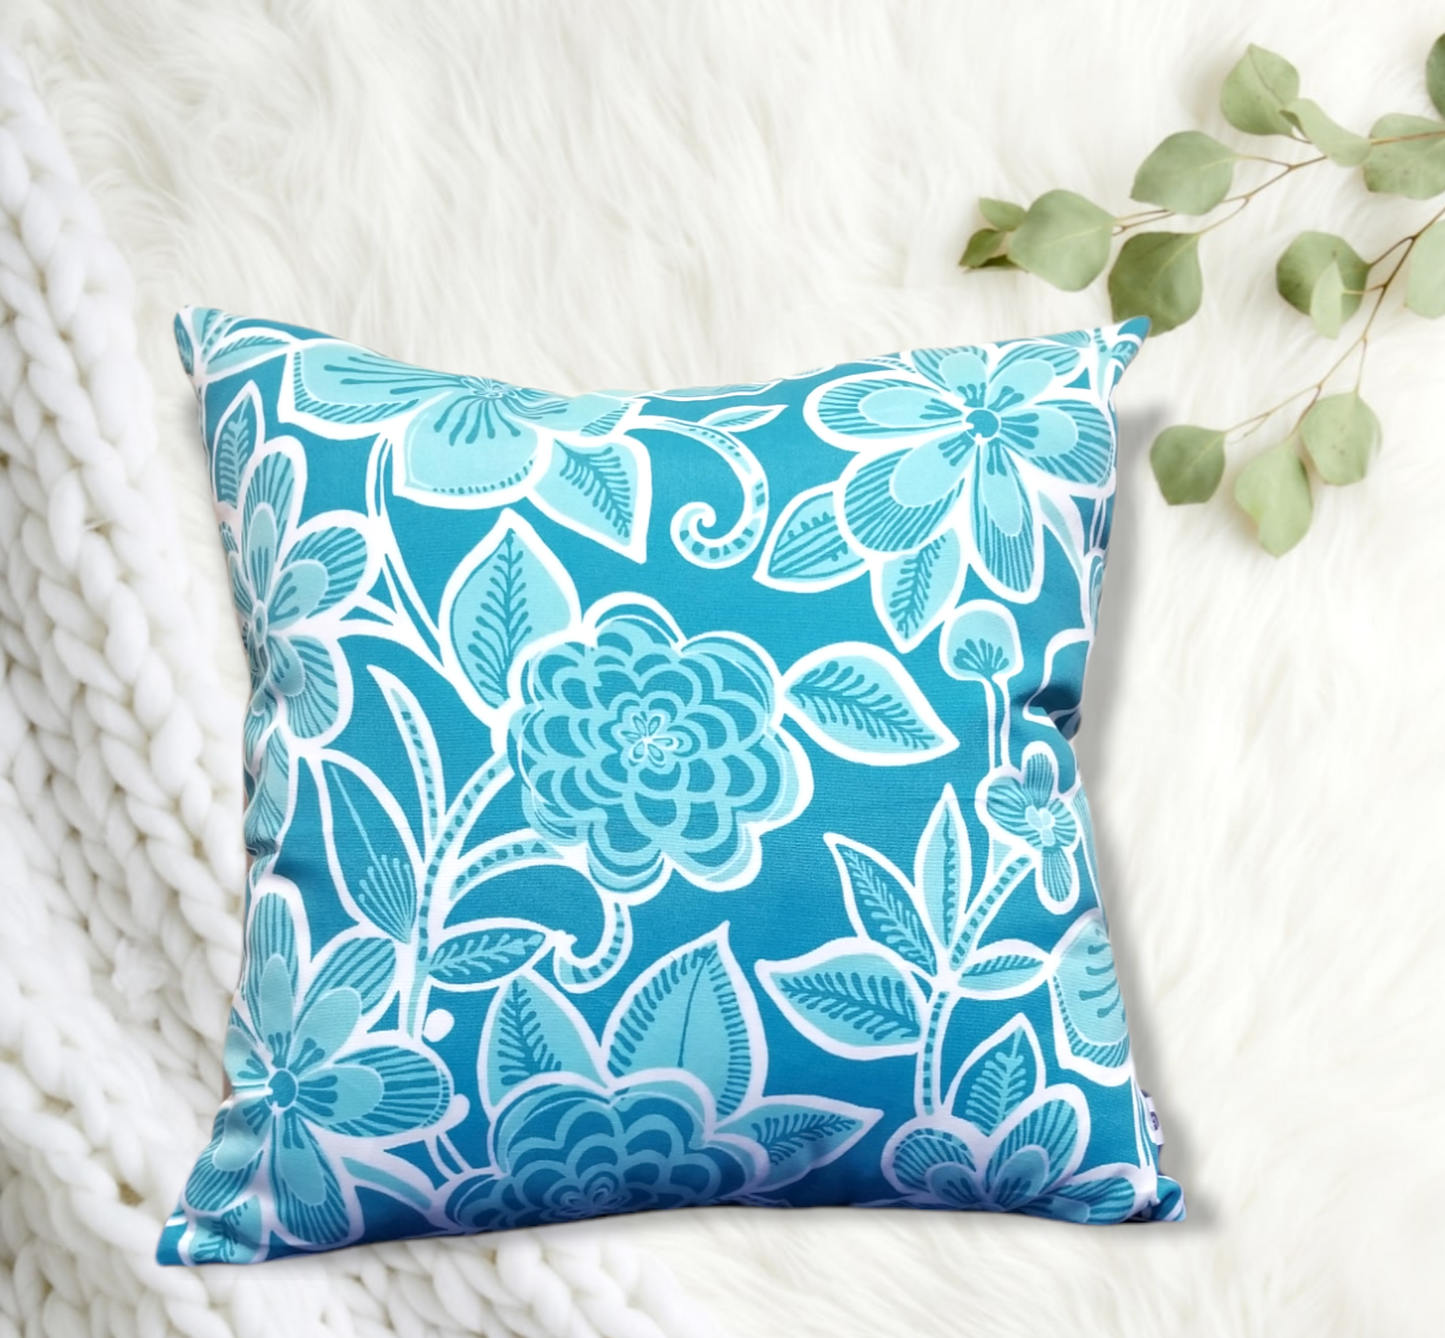 This fun and exciting Blue floral outdoor fabric makes a perfect decor piece for your outdoor patio, porch or foyer. This tropical spring colored Accent throw pillow comes in a 20 inch square with white back and 10x22 Lumbar with matching back. Complete with invisible zipper and sealed edges for durability. Shop our bestseller and get international shipping.